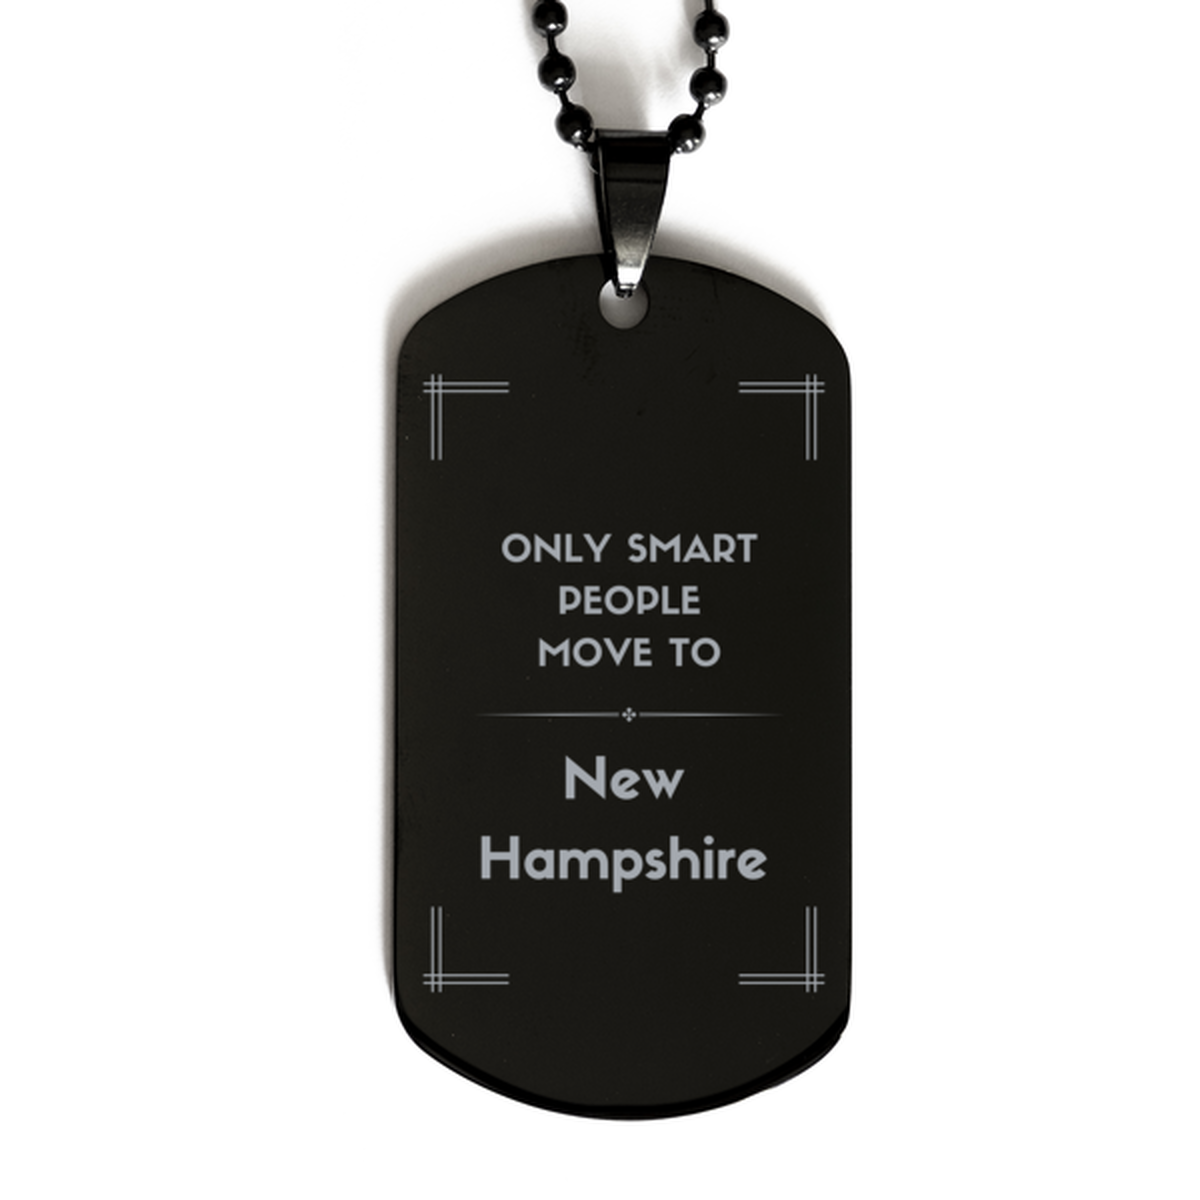 Only smart people move to New Hampshire Black Dog Tag, Gag Gifts For New Hampshire, Move to New Hampshire Gifts for Friends Coworker Funny Saying Quote